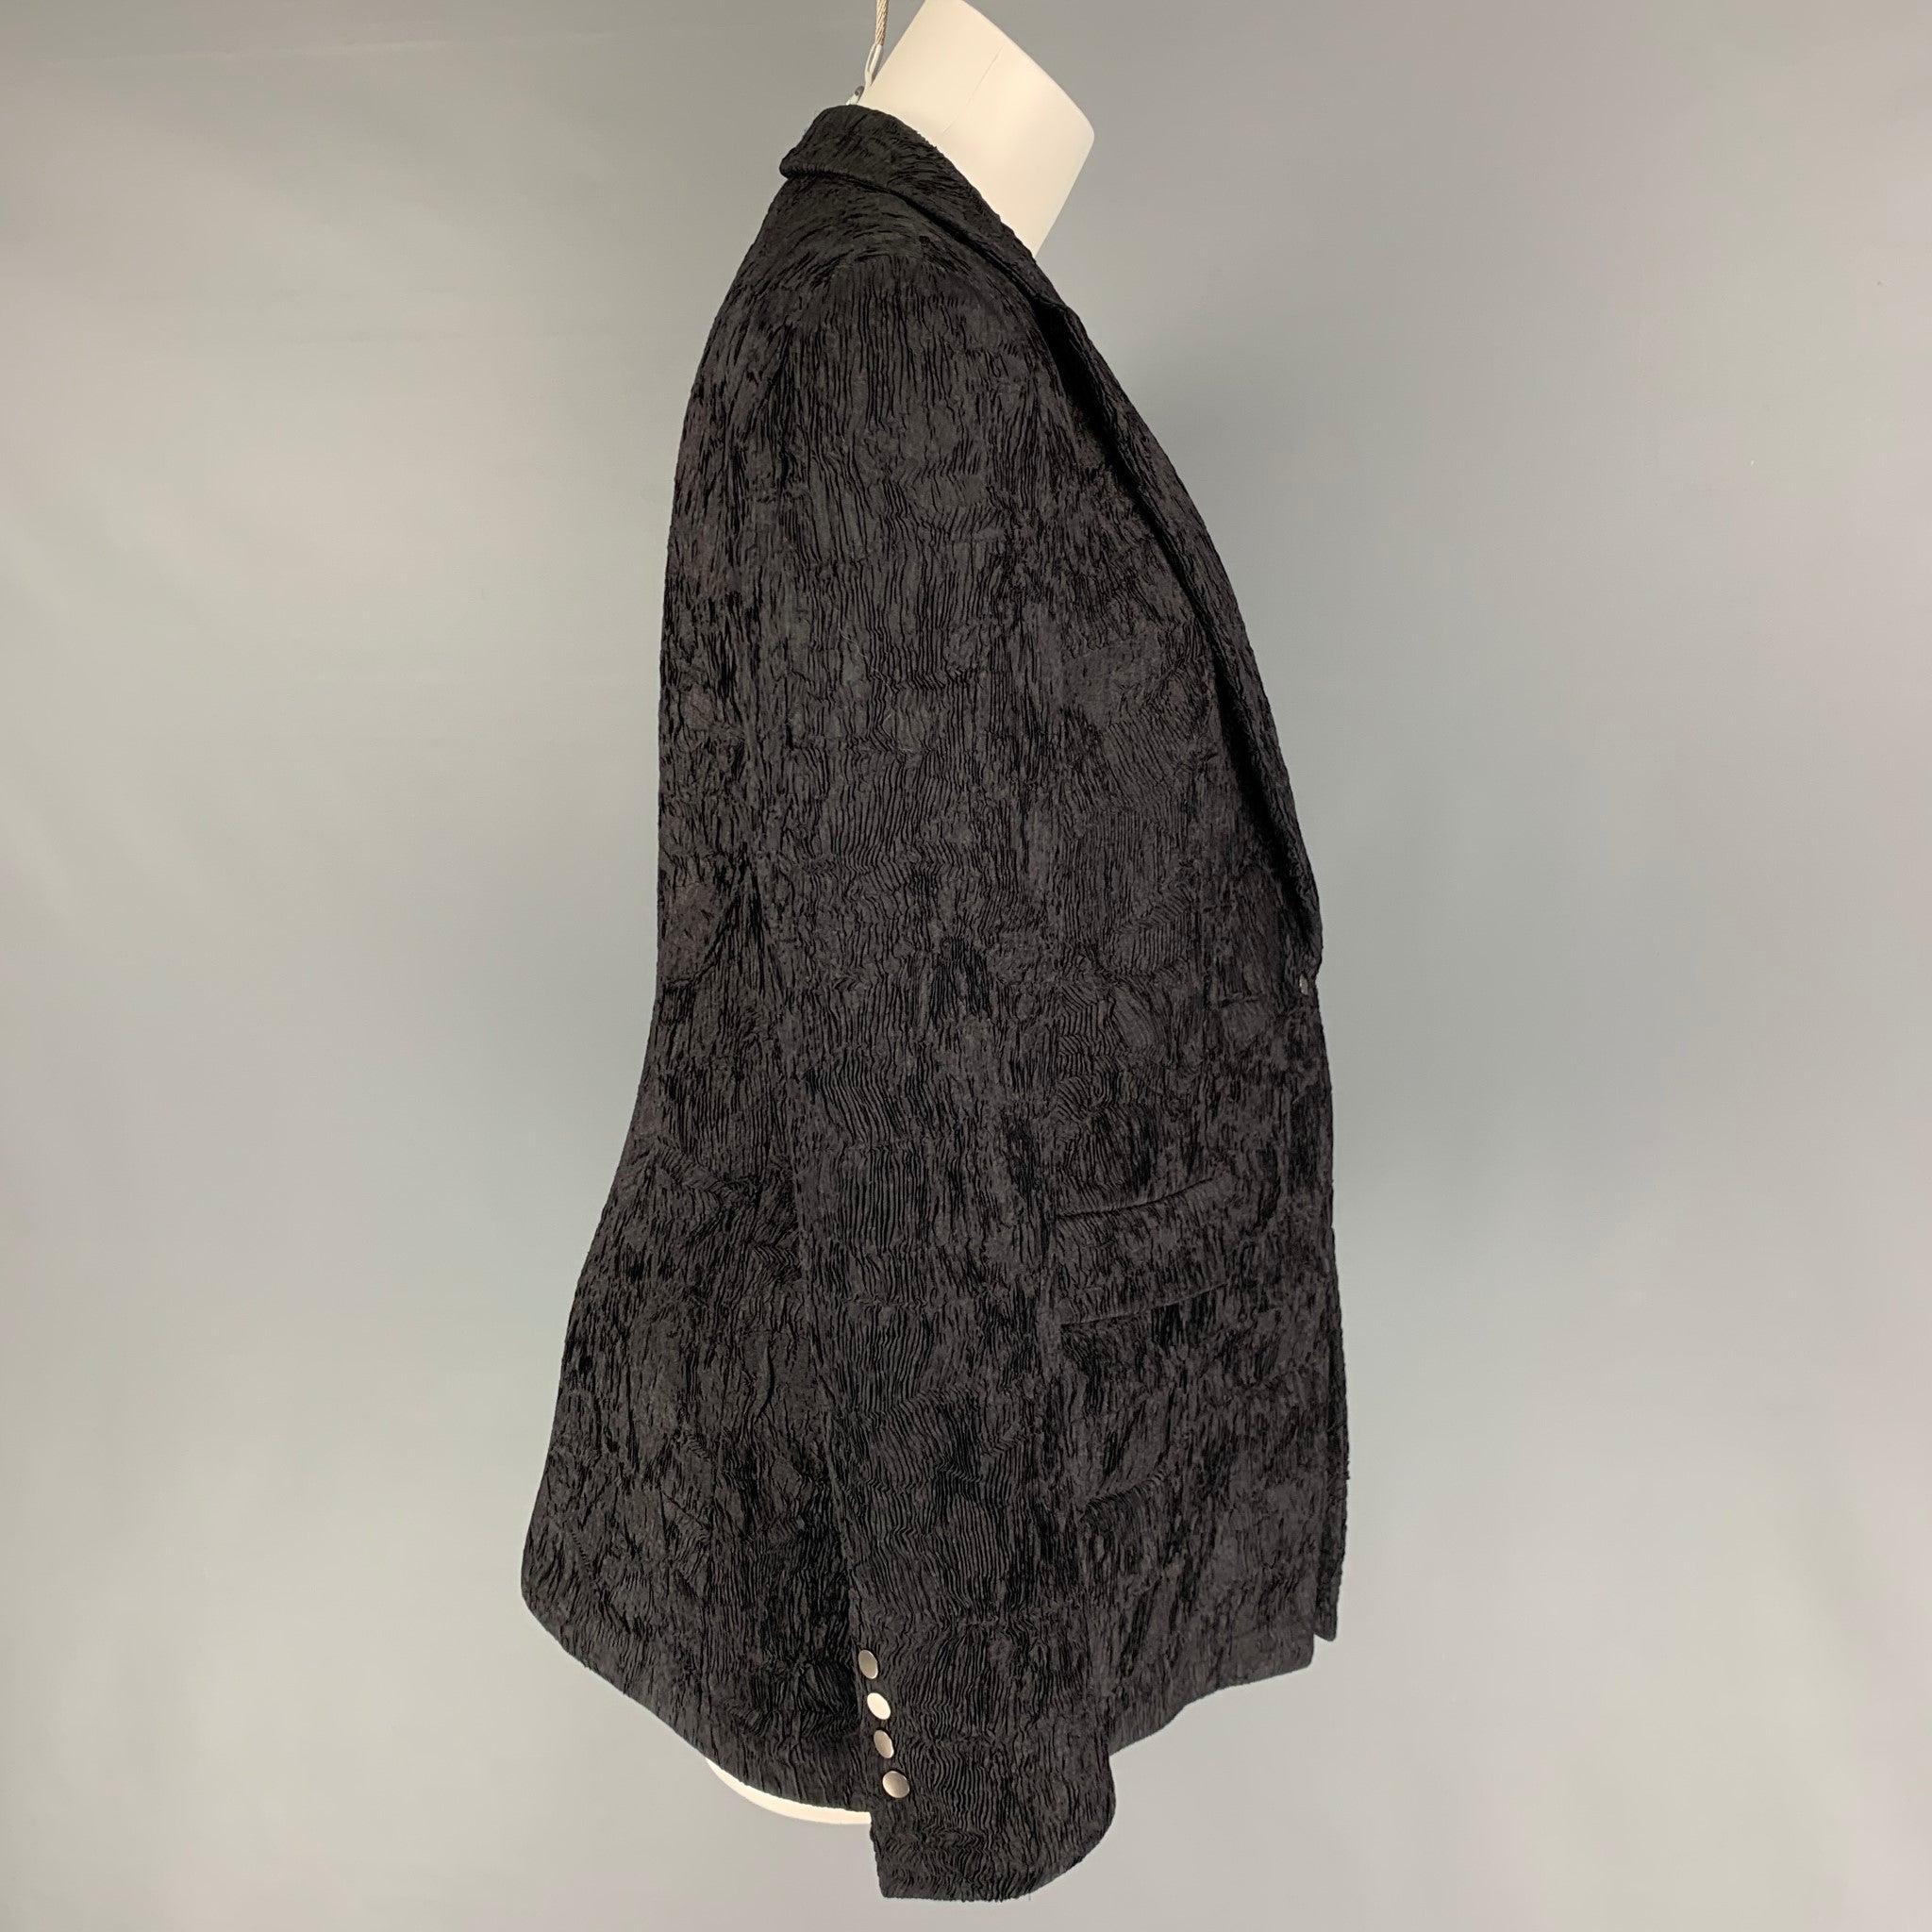 GIORGIO ARMANI jacket comes in a black textured silk / viscose featuring a notch lapel, flap pockets, single back vent, and a single button closure. Made in Italy.
Very Good
Pre-Owned Condition. 

Marked:   46 

Measurements: 
 
Shoulder: 17 inches 